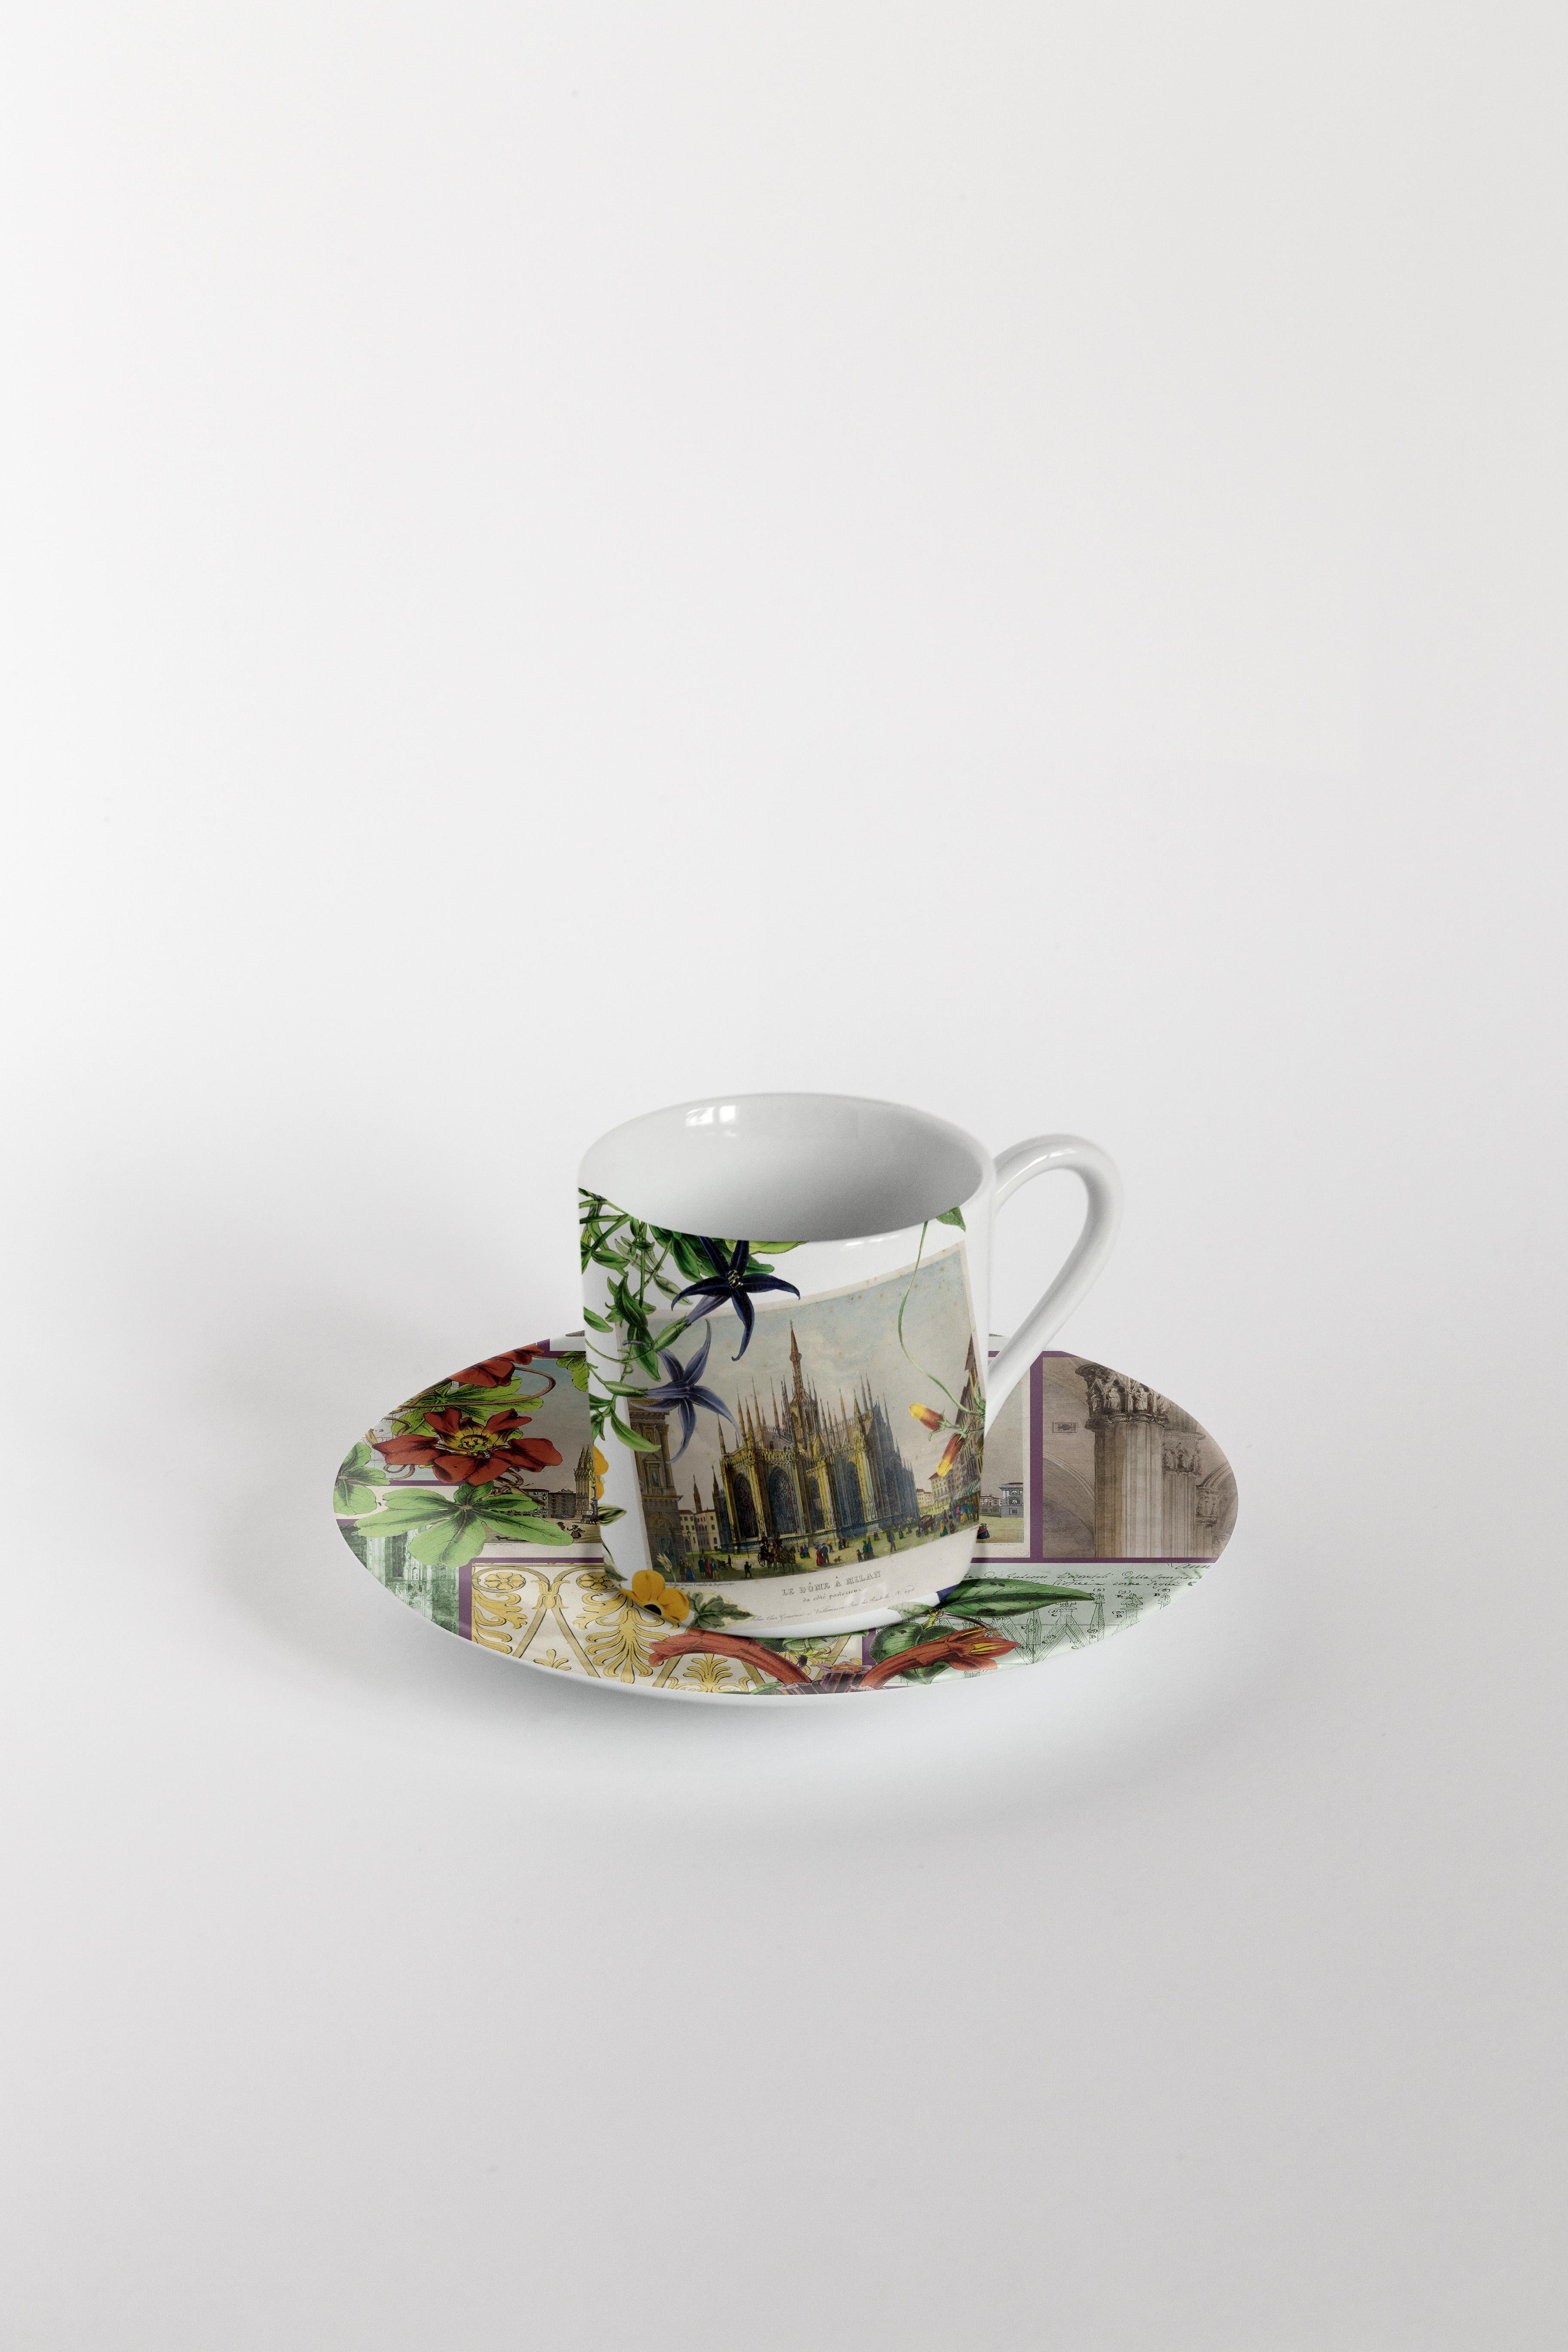 Porcelain La Storia Infinita, Six Contemporary Decorated Coffee Cups with Plates For Sale